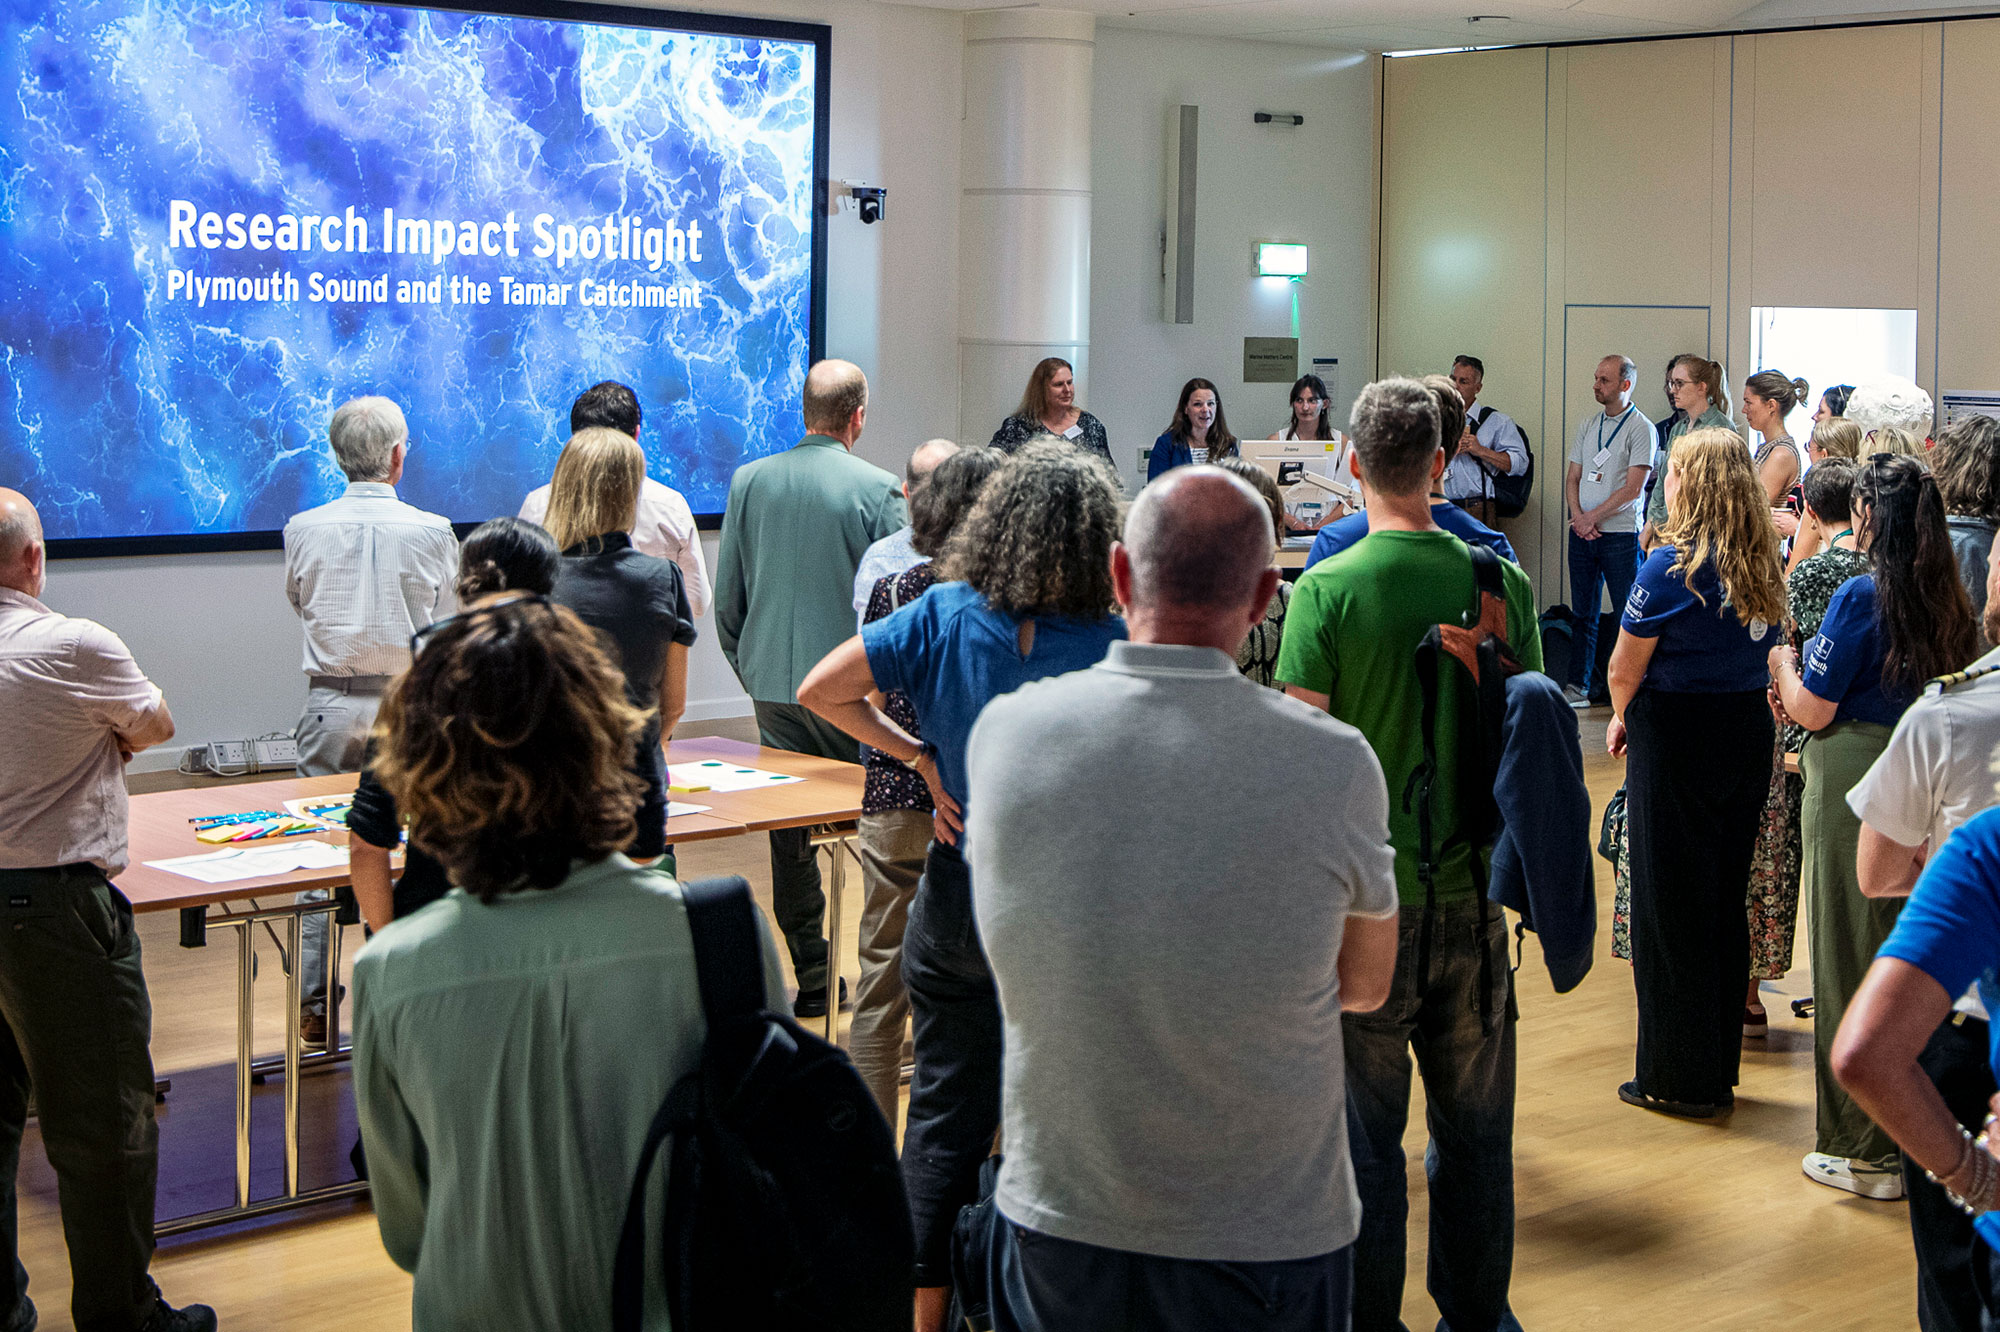 Research Impact Spotlight event at PML